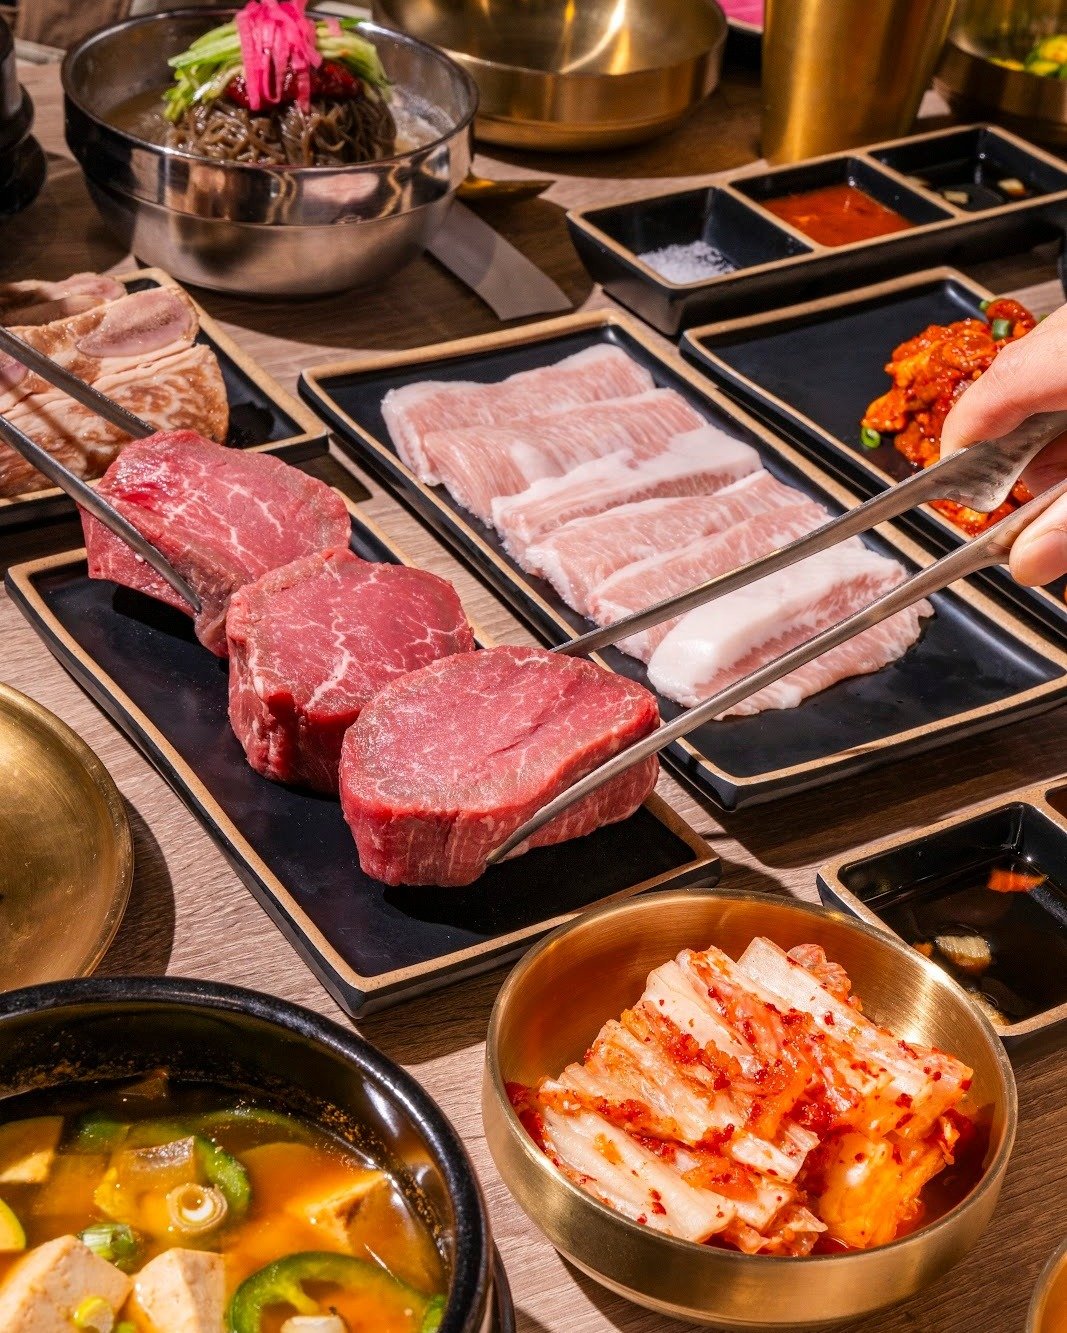 Raising the steaks over here!! 🥩🔥Gather around the grill and join us this week! 

#88qkbbq #meat #grillmaster #grillandchill #datenight #koreanfood #banchan #rowlandheights #kbbq